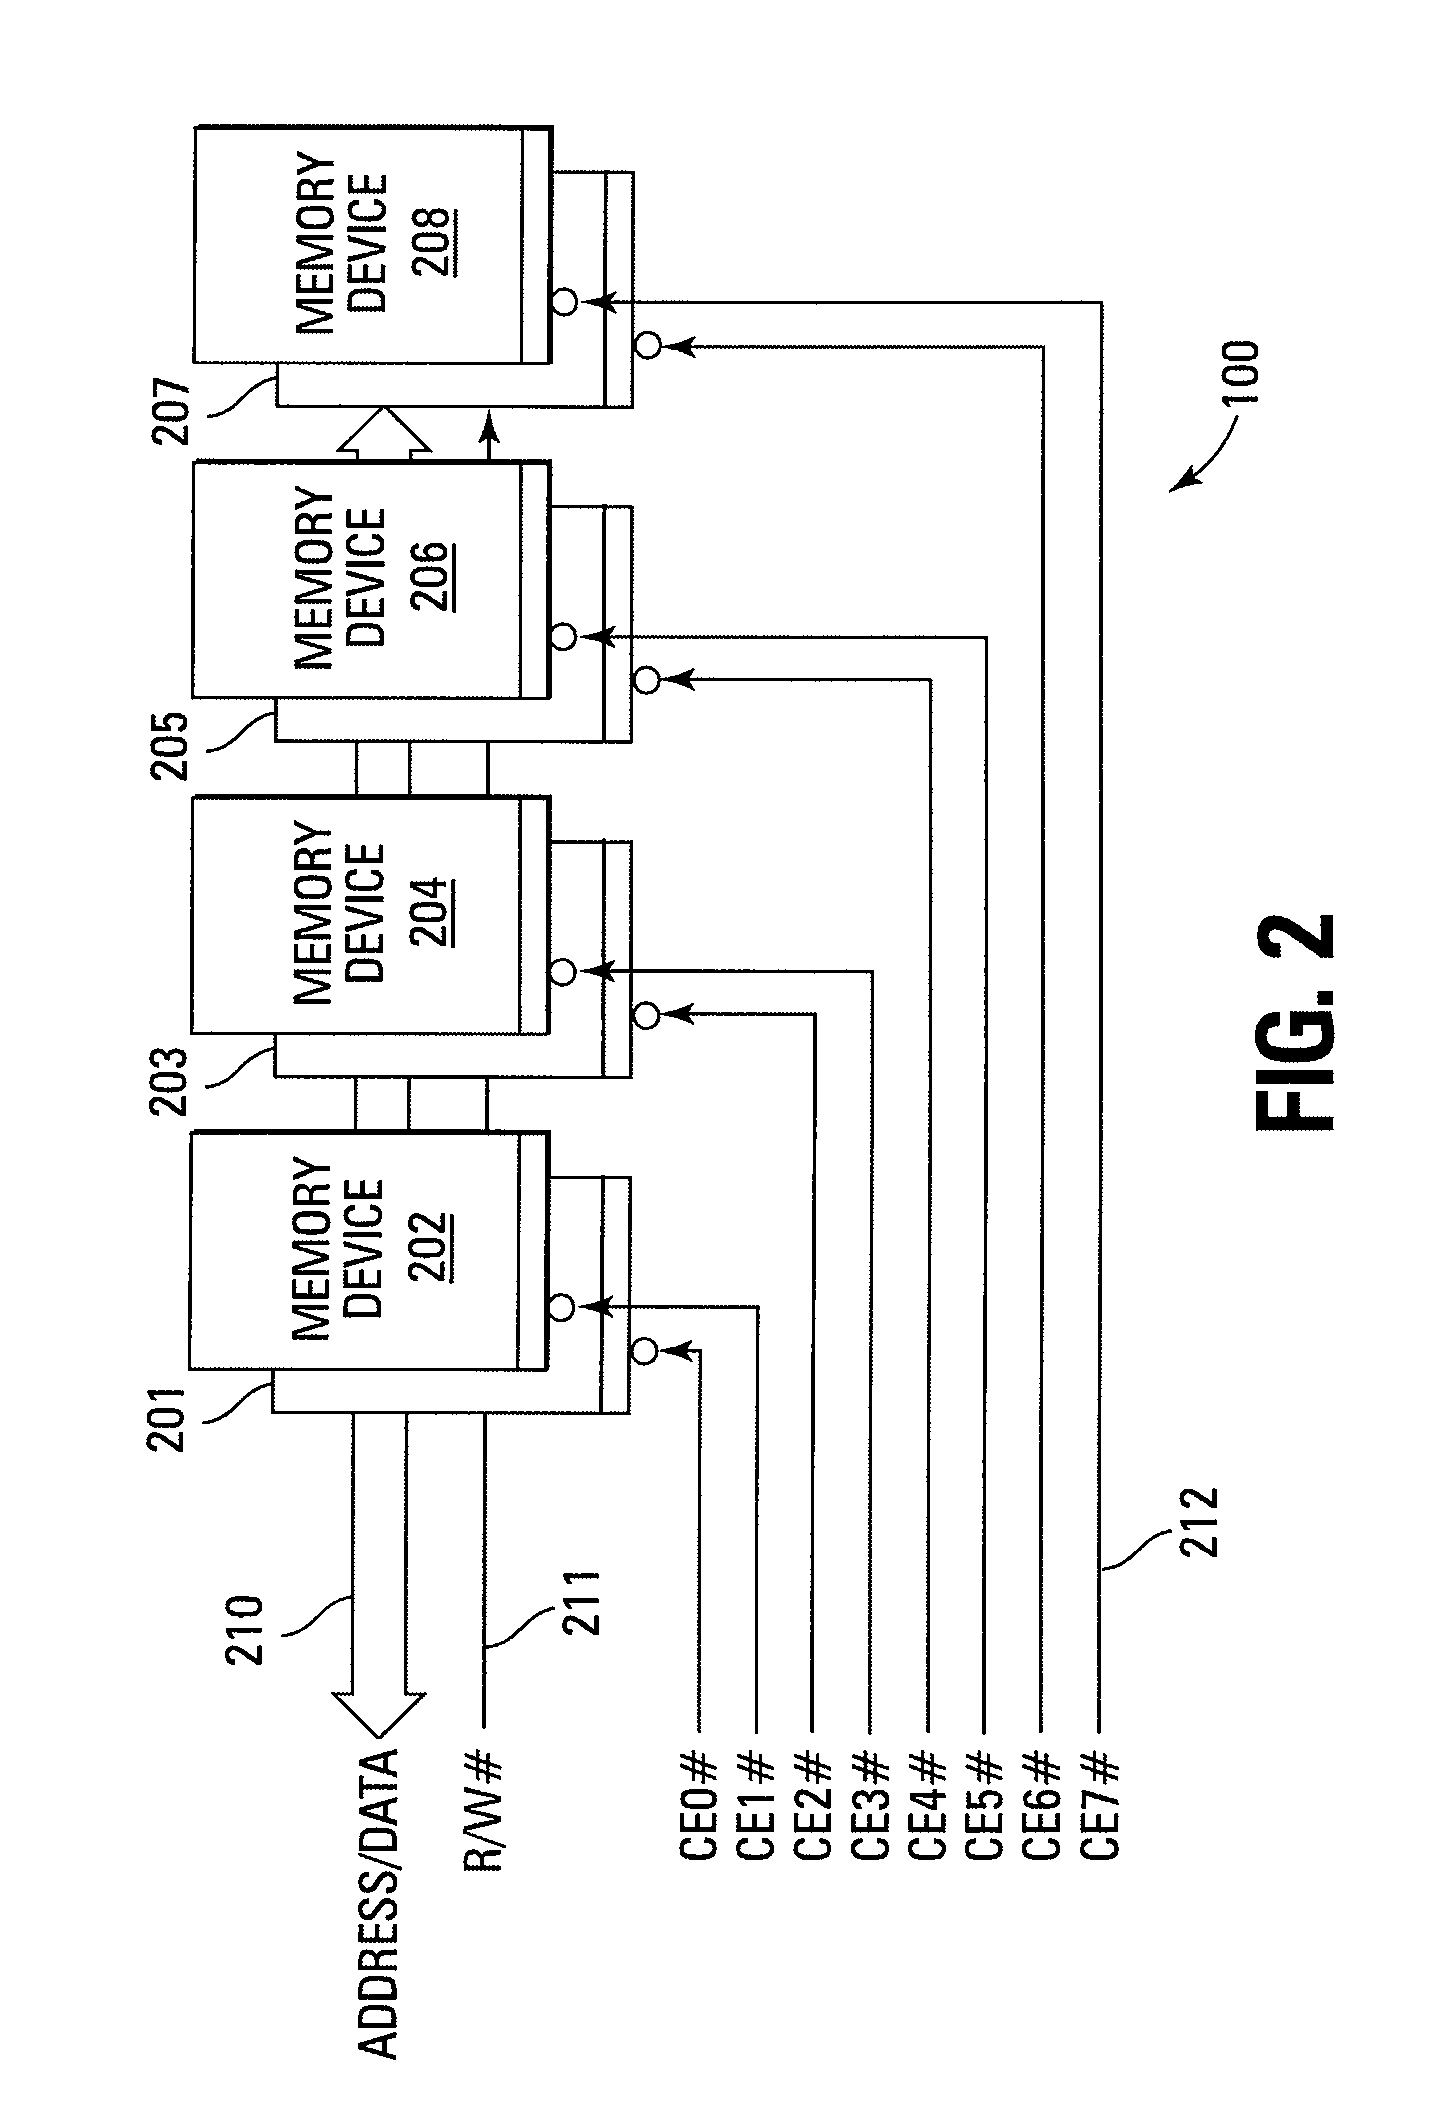 Data recovery in a solid state storage system